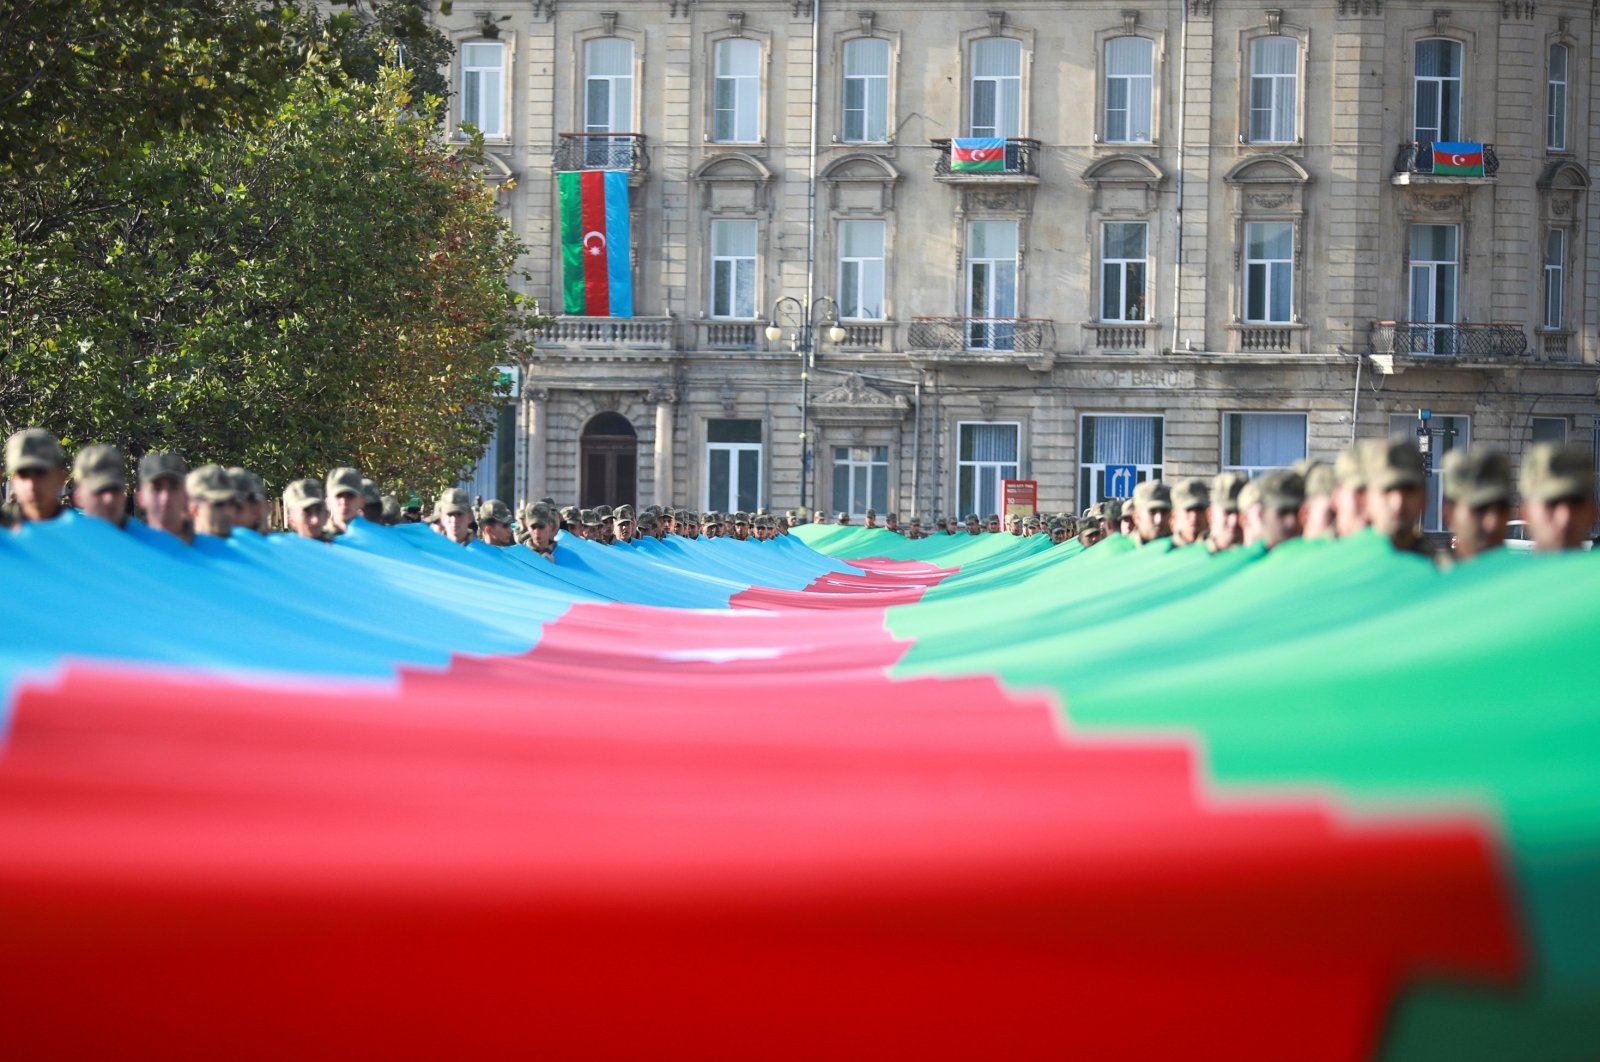 Azerbaijani service members carry a giant flag during a procession marking the anniversary of the end of the 2020 military conflict over Nagorno-Karabakh from Armenian occupation, Nov. 8, 2021. (Reuters Photo)